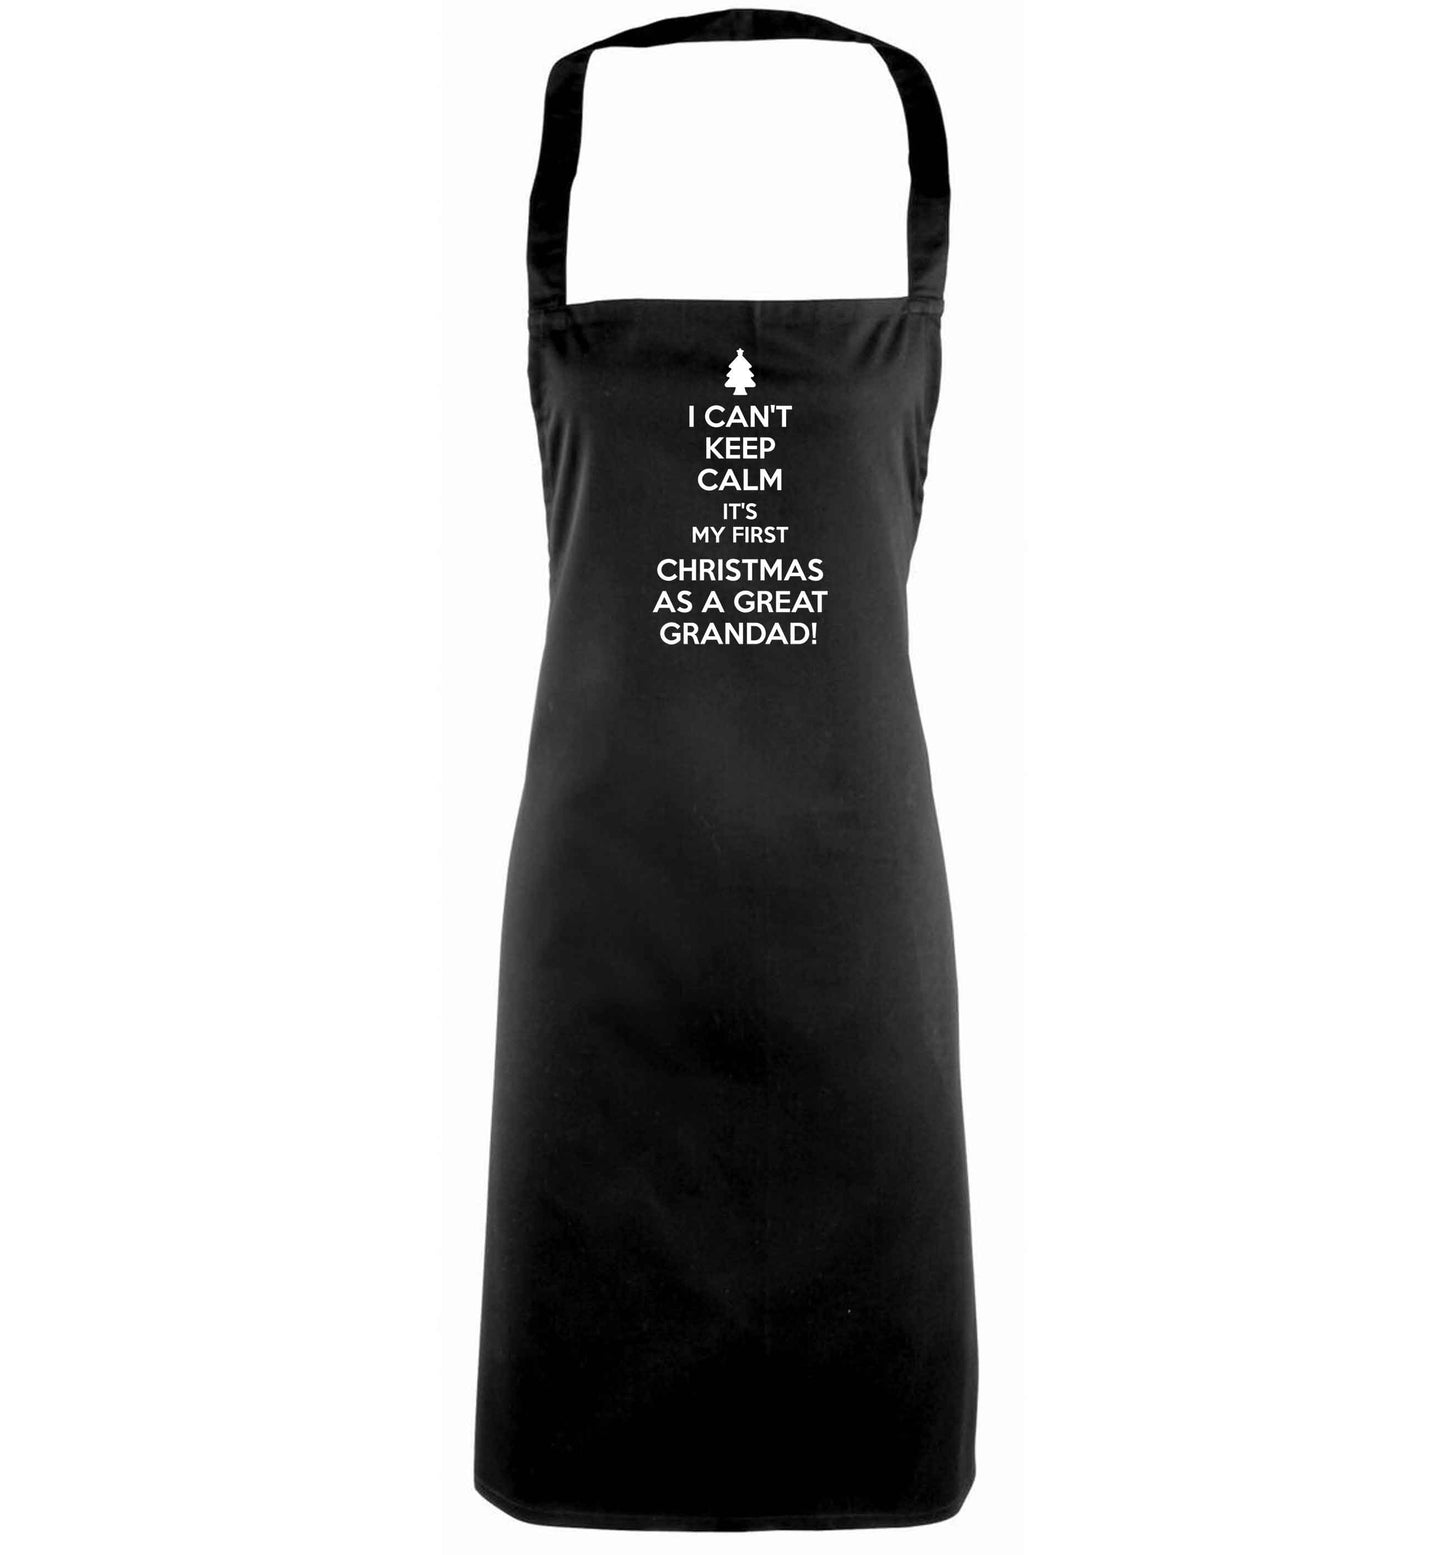 I can't keep calm it's my first Christmas as a great grandad! black apron